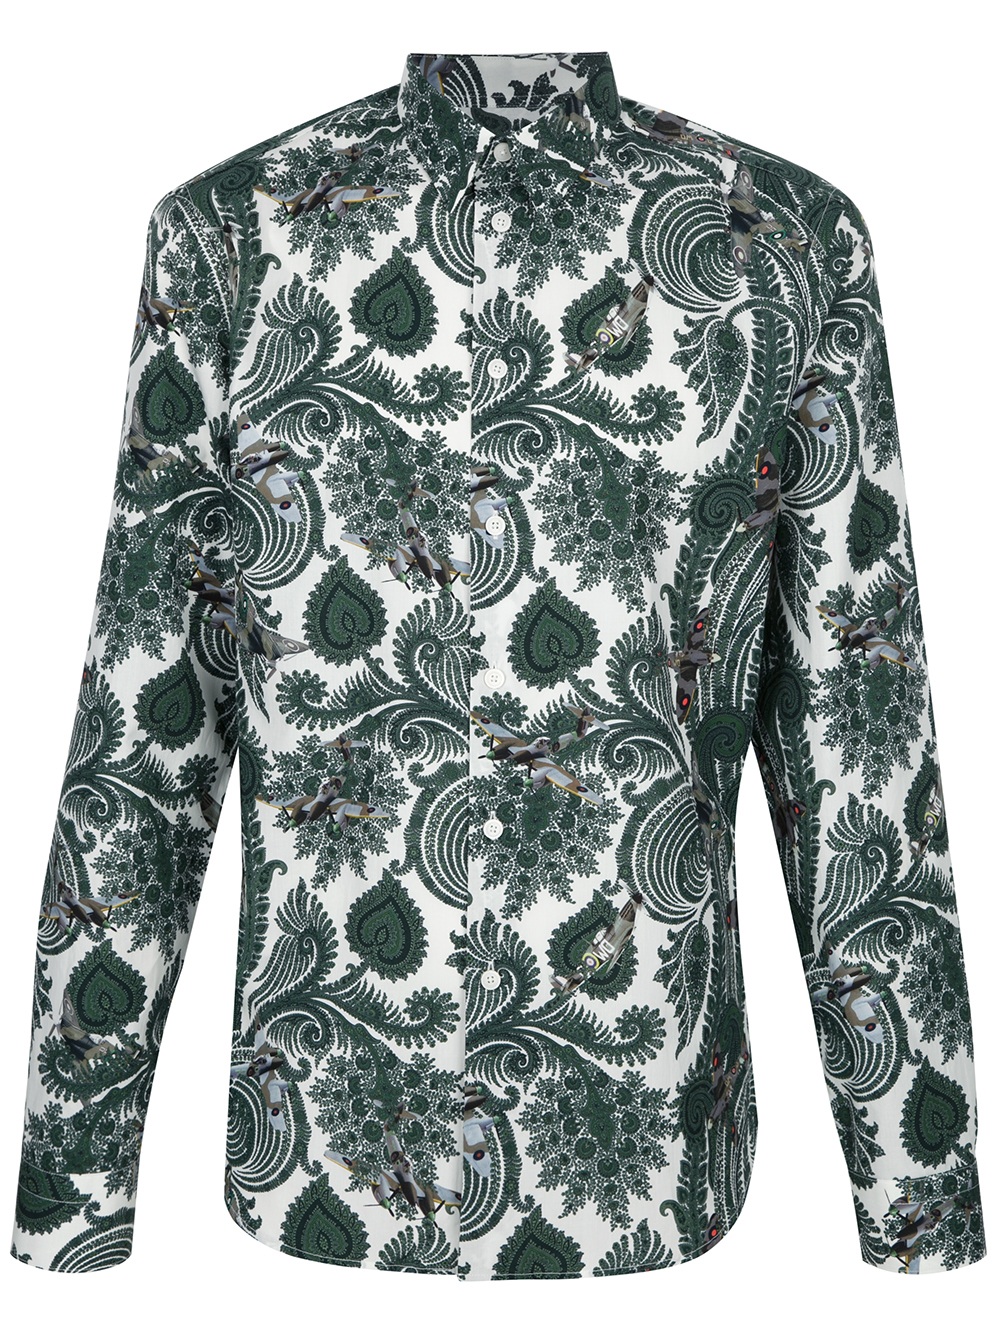 Lyst - Givenchy Paisley Print Shirt in Green for Men